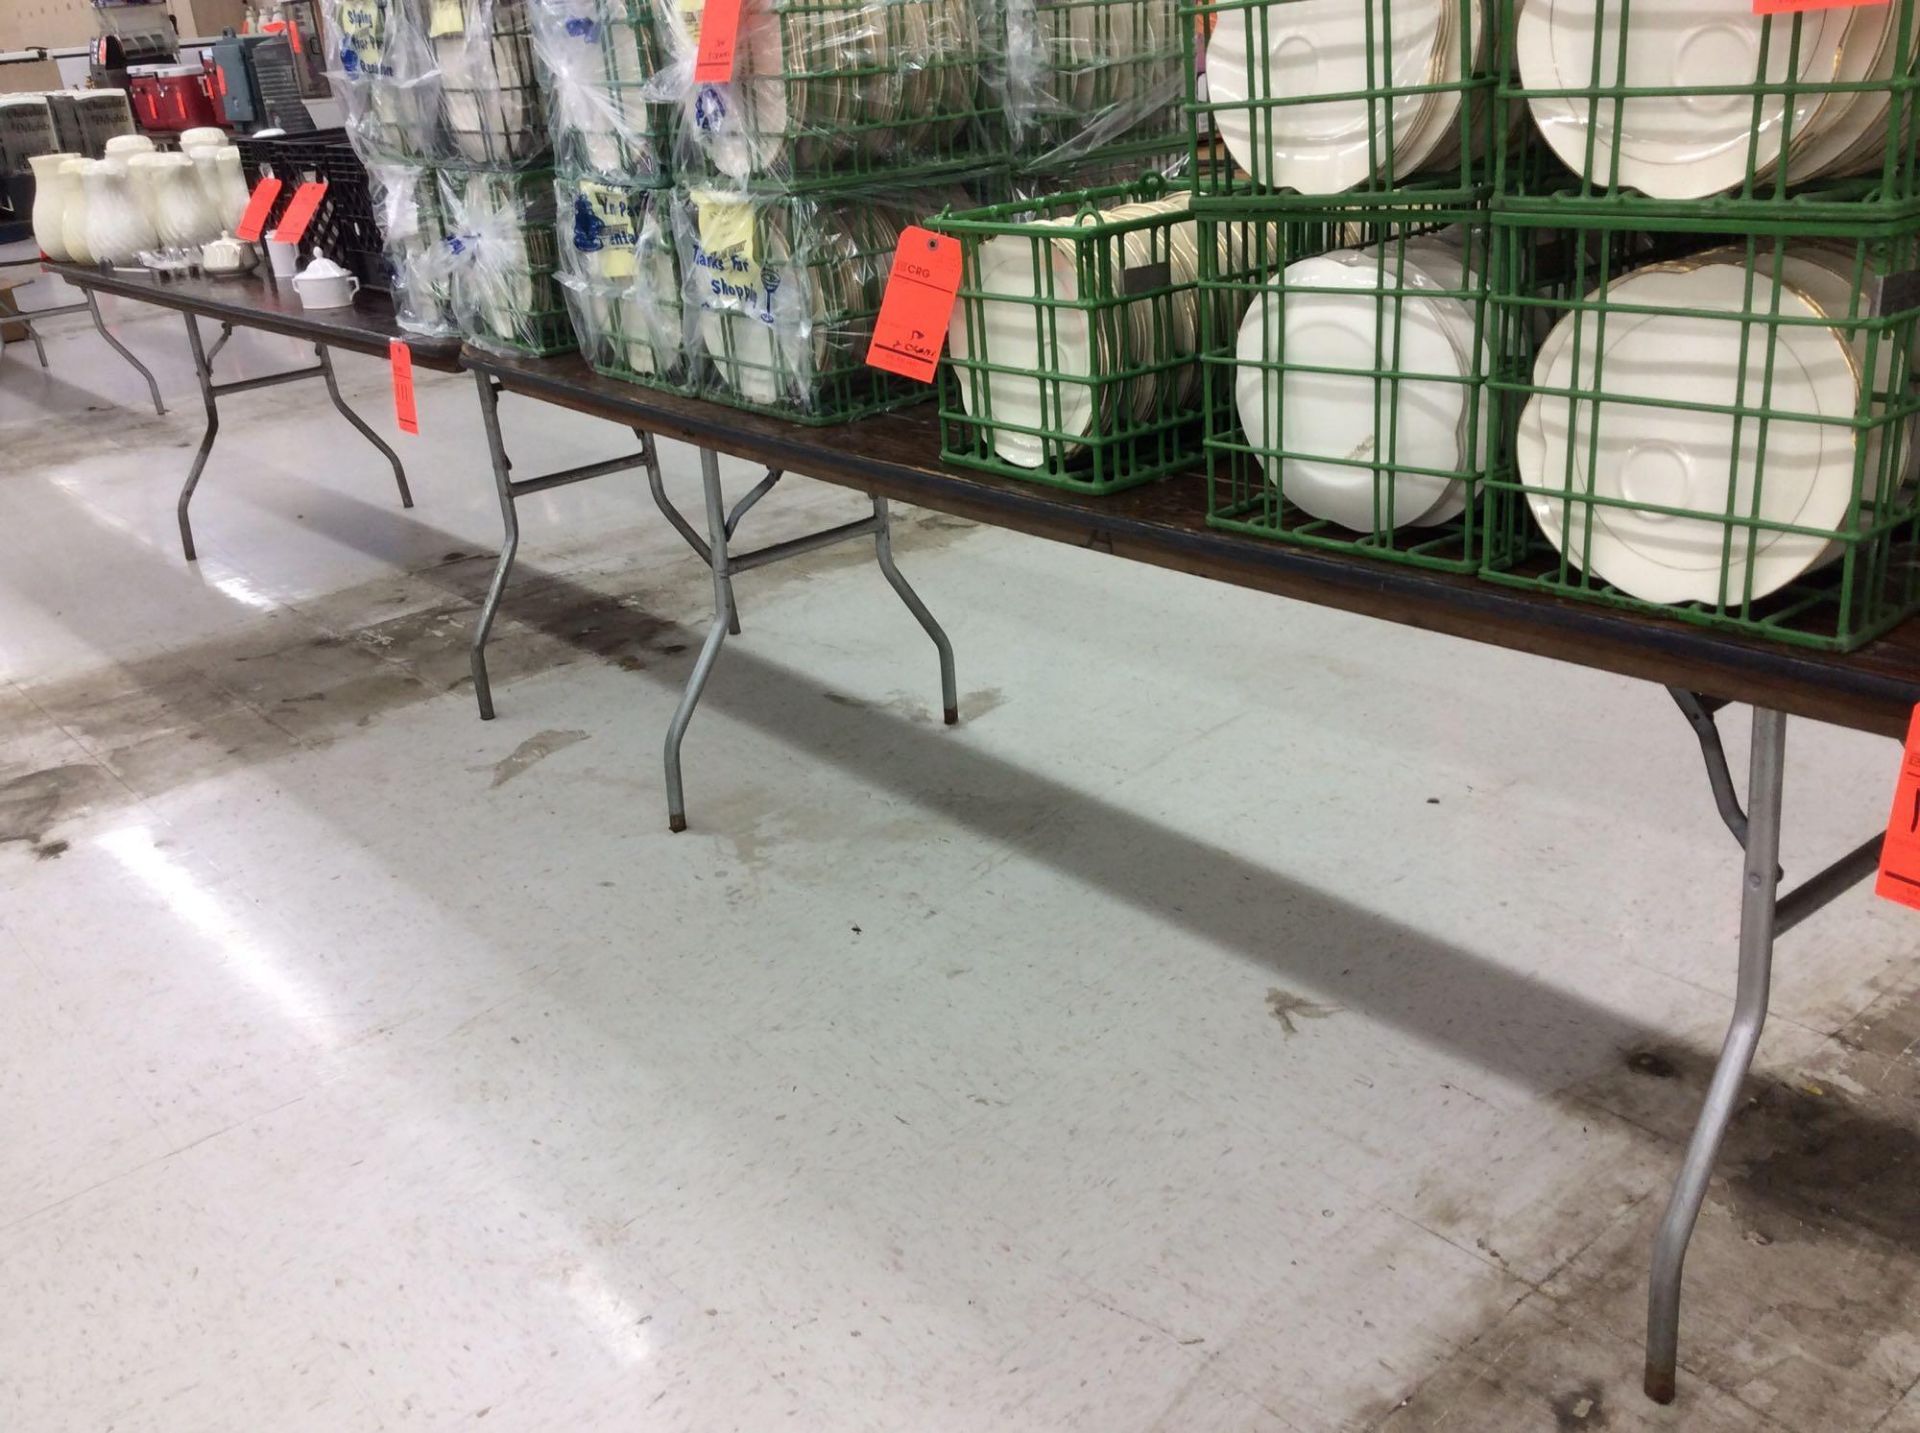 Lot of (15) assorted 8 foot by 30 inch folding leg wood tables, no contents. Purchaser should